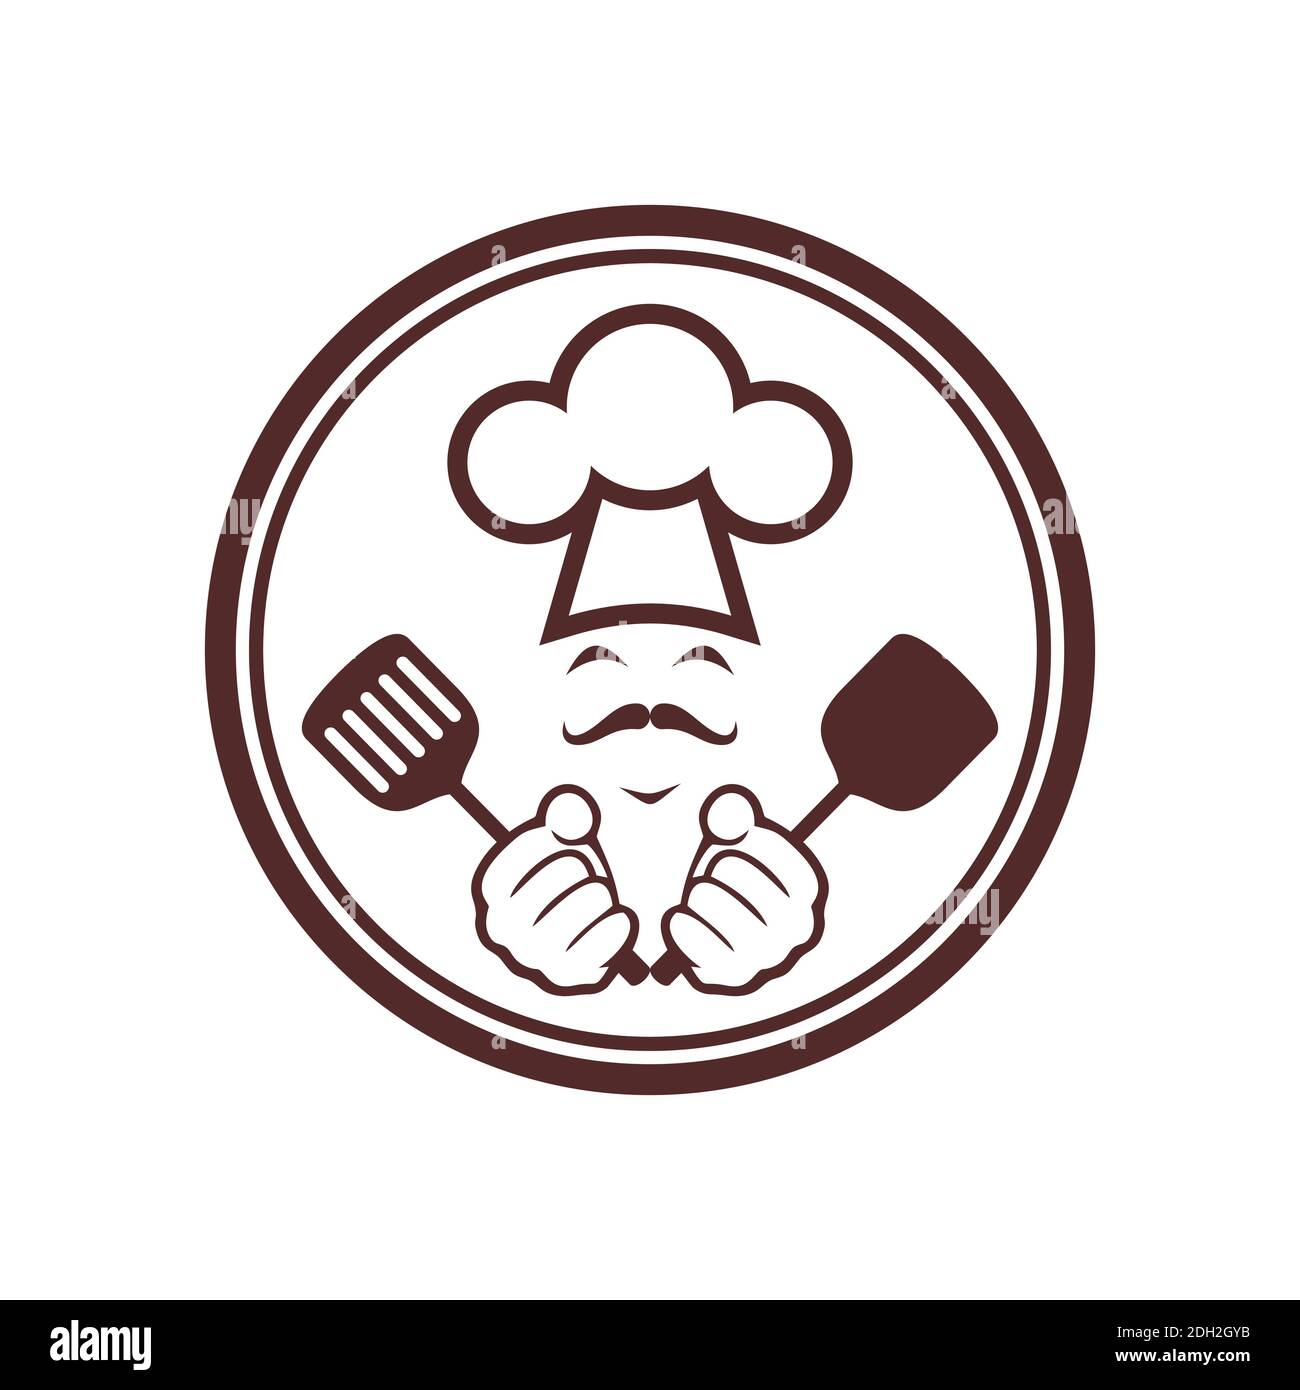 chef abstract kitchener cooky icon logo vector design concept Stock Vector